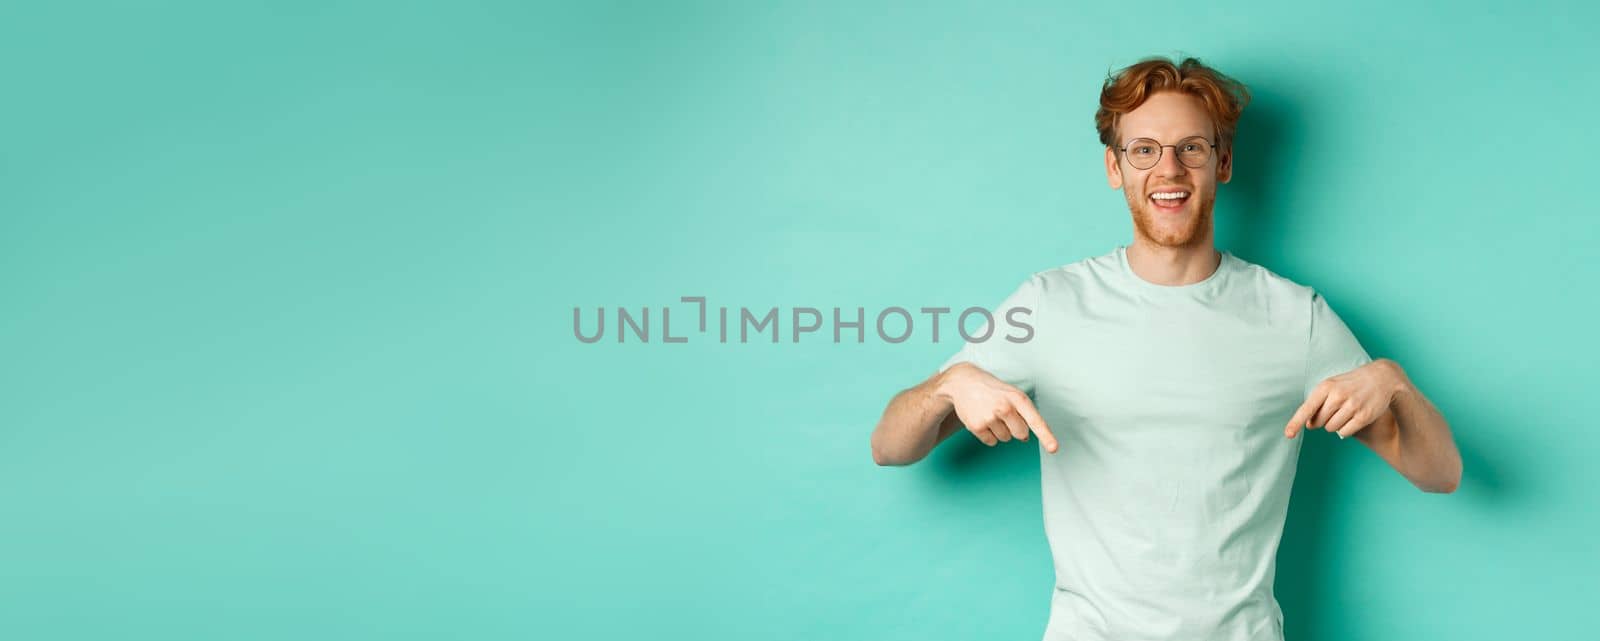 Happy young man with red hair, wearing glasses and t-shirt, showing advertisement, smiling and pointing fingers down, standing over turquoise background.